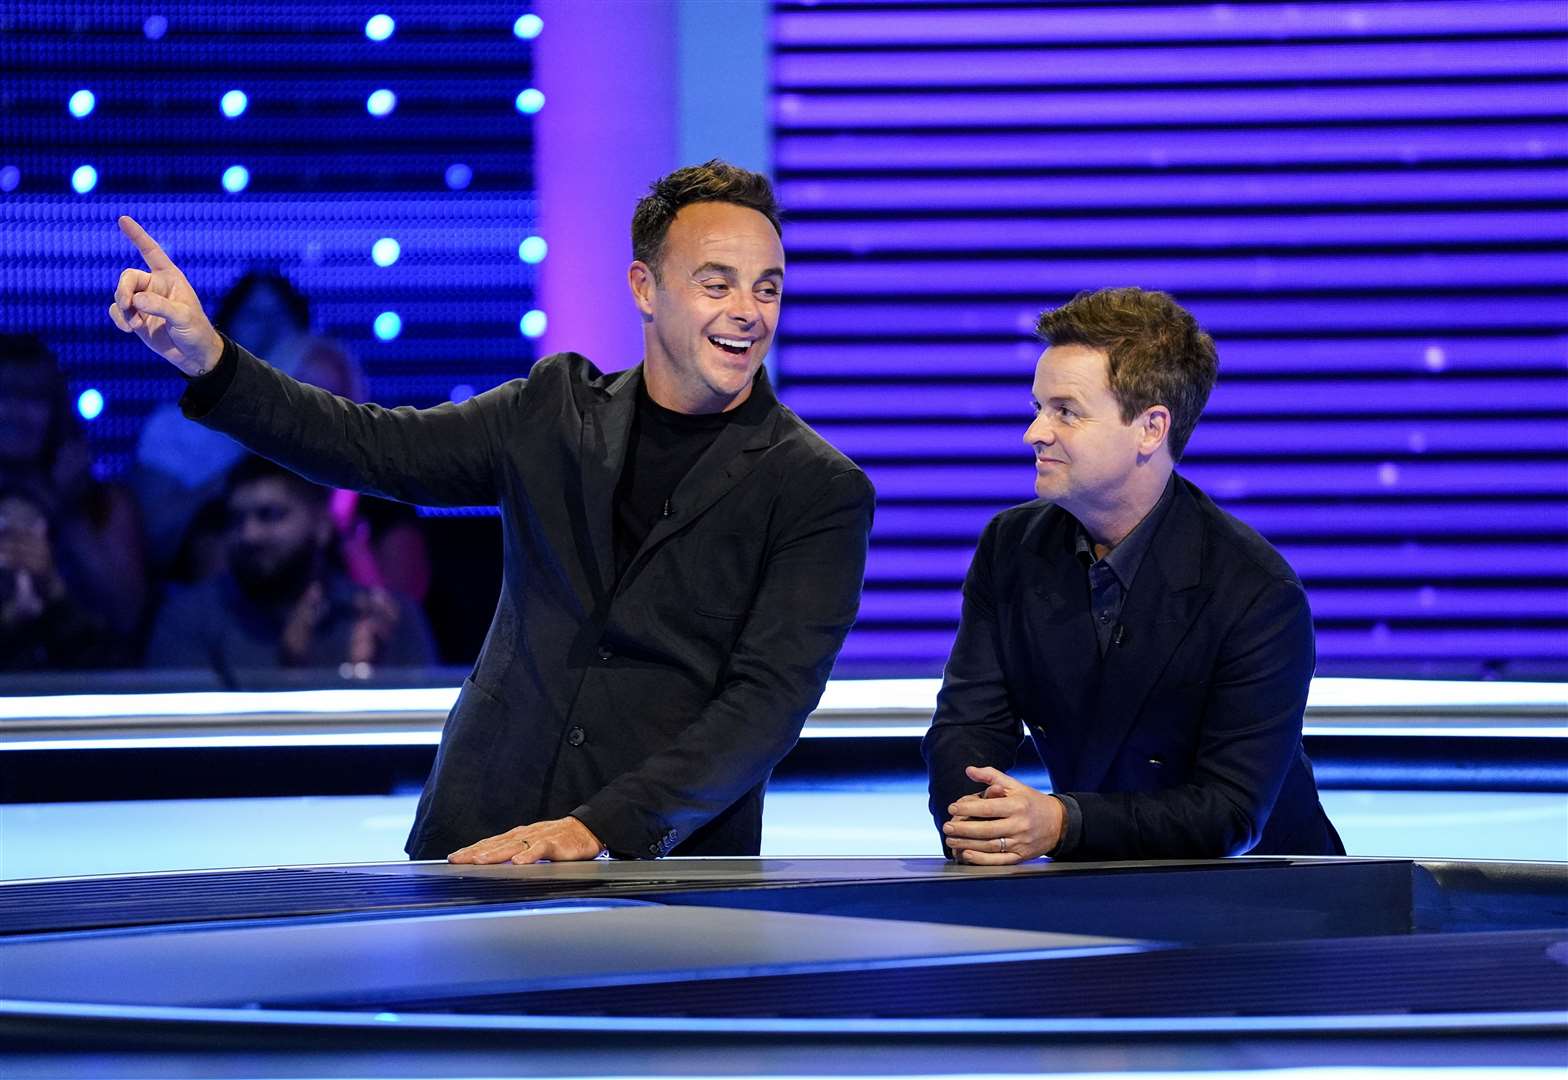 The is the largest amount of the money the show, hosted by Ant and Dec, has ever given away. Picture: ITV